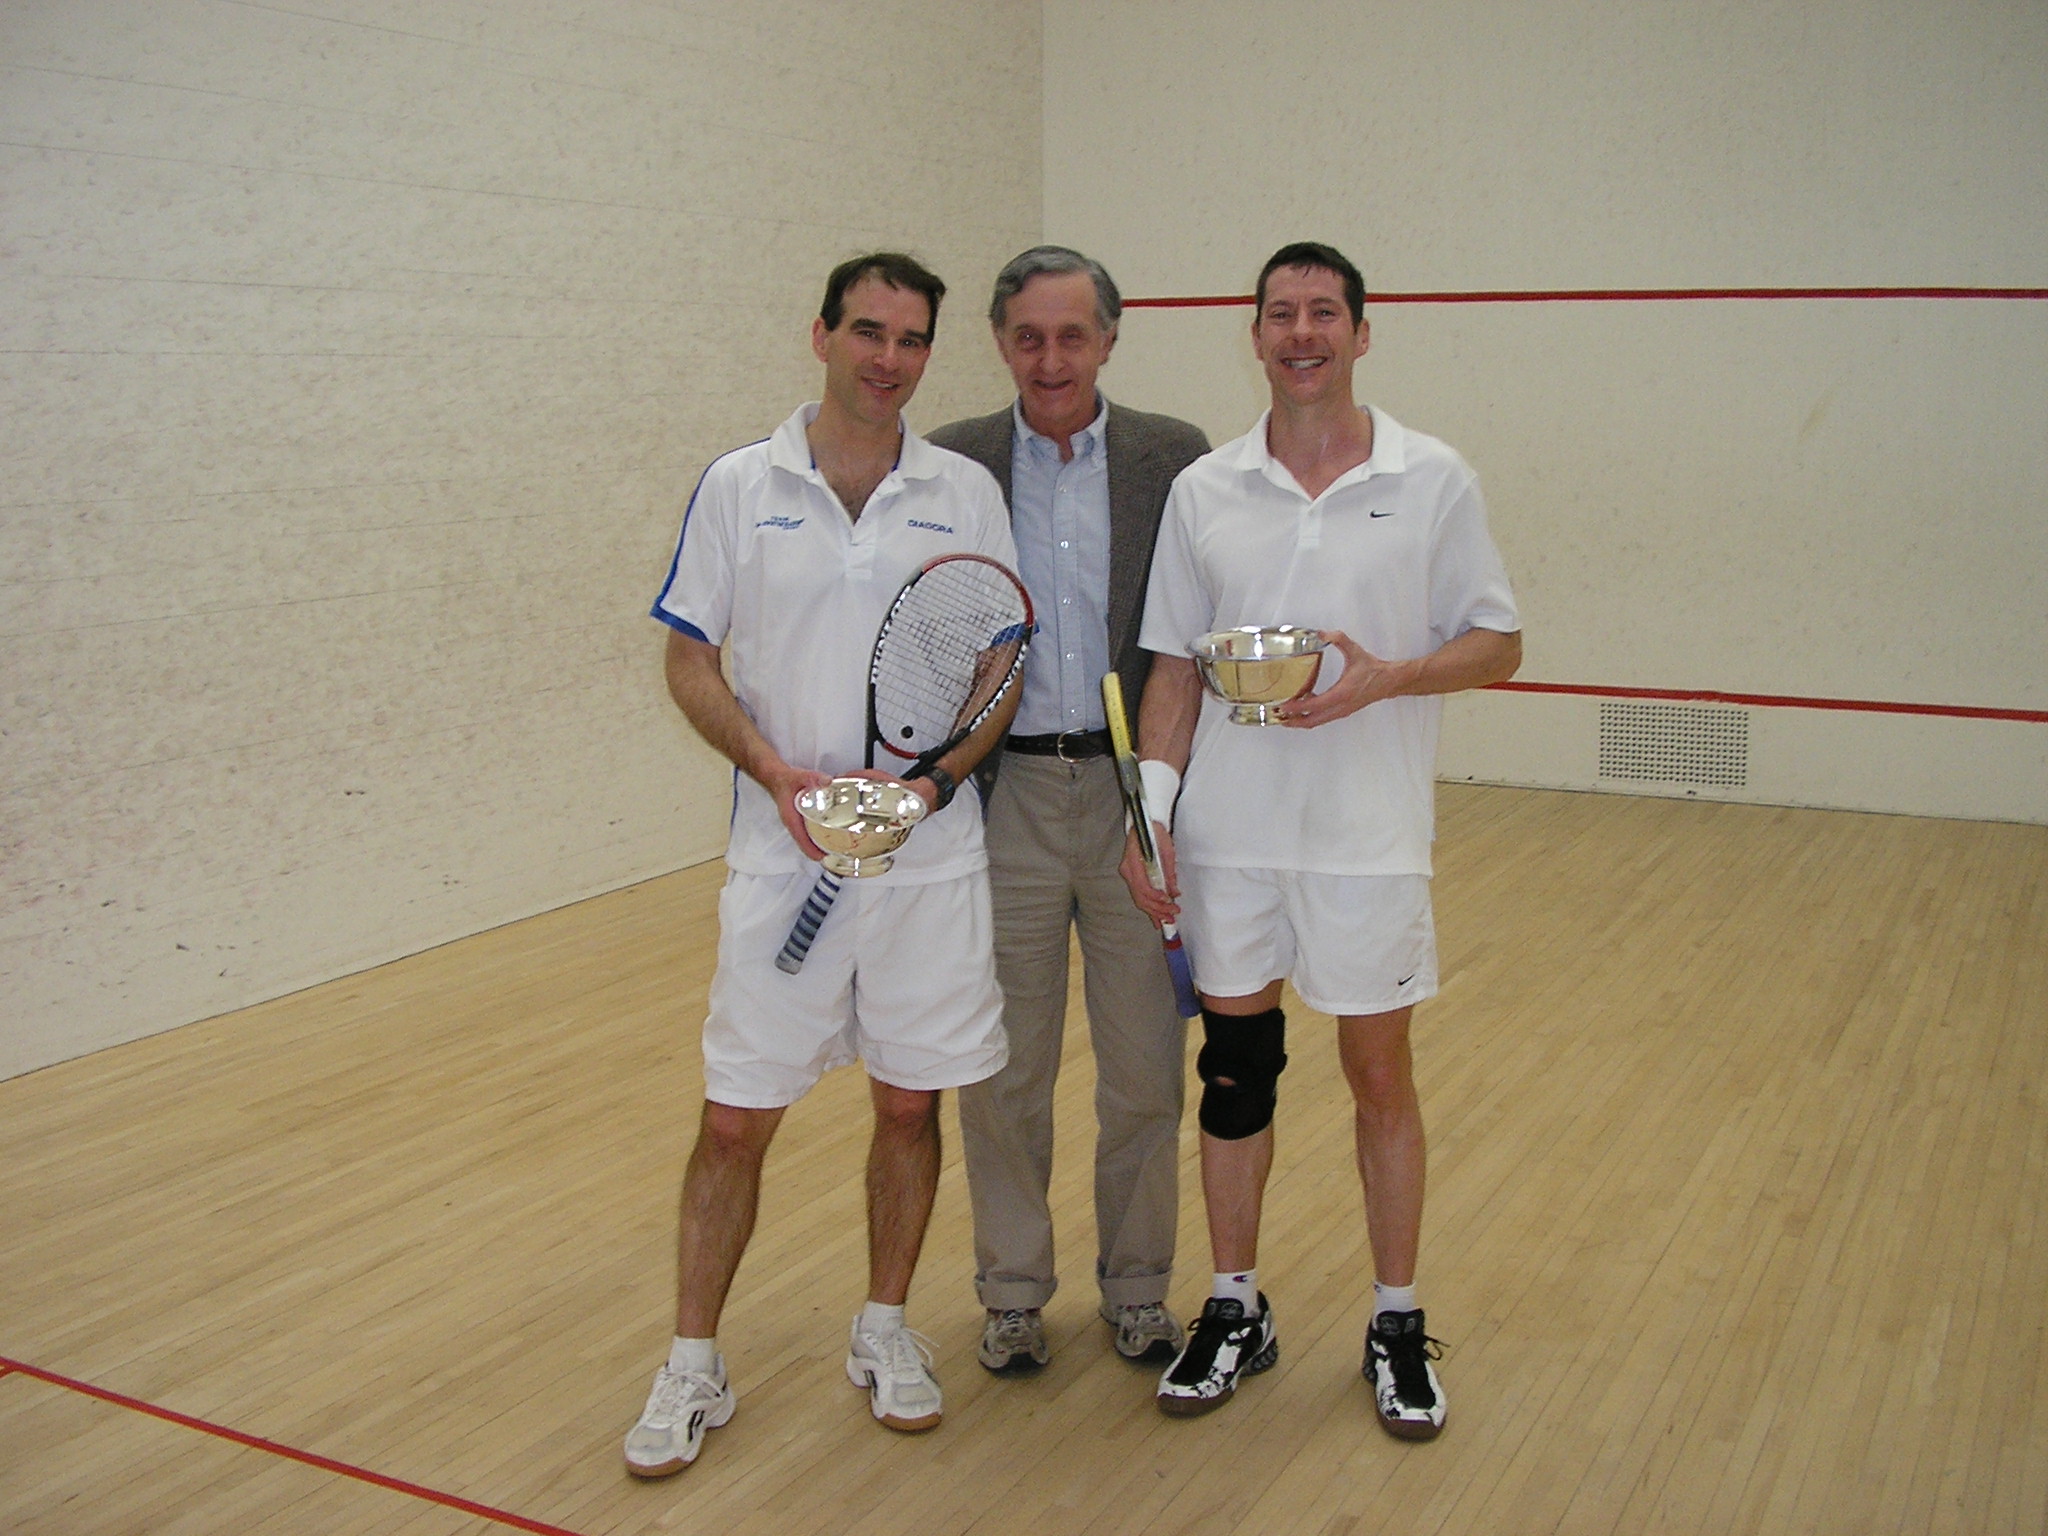 In the M40 final, Tim Kent was presented with the runners-up trophy by Roger Wales, and the winner was Tom Harrity